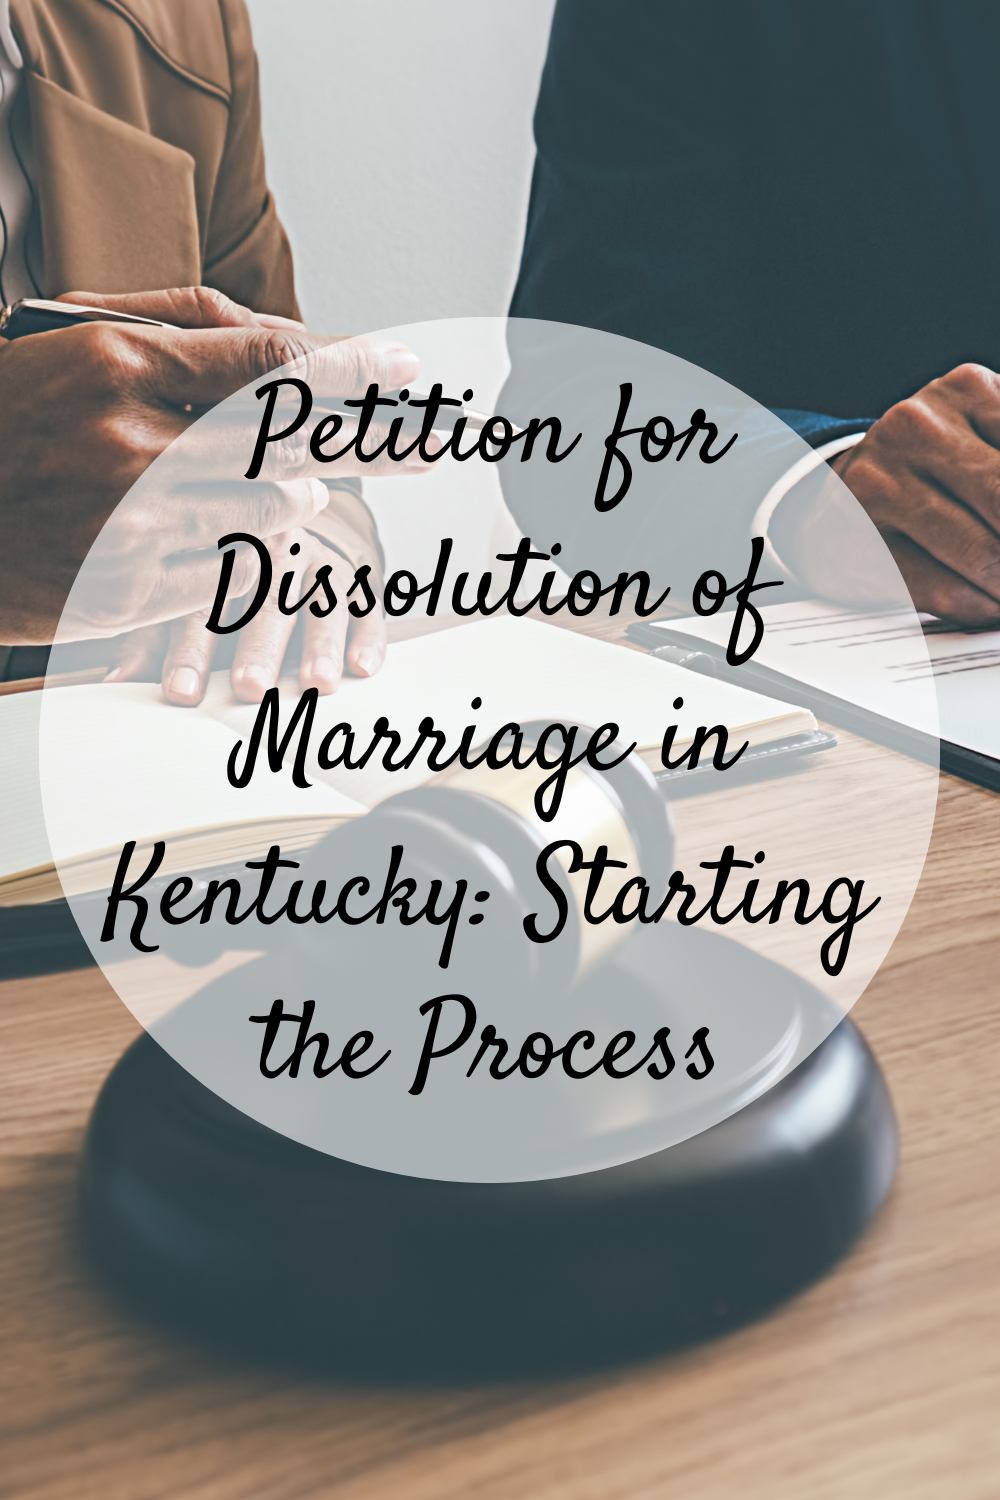 Petition for Dissolution of Marriage in Kentucky: Starting the Process